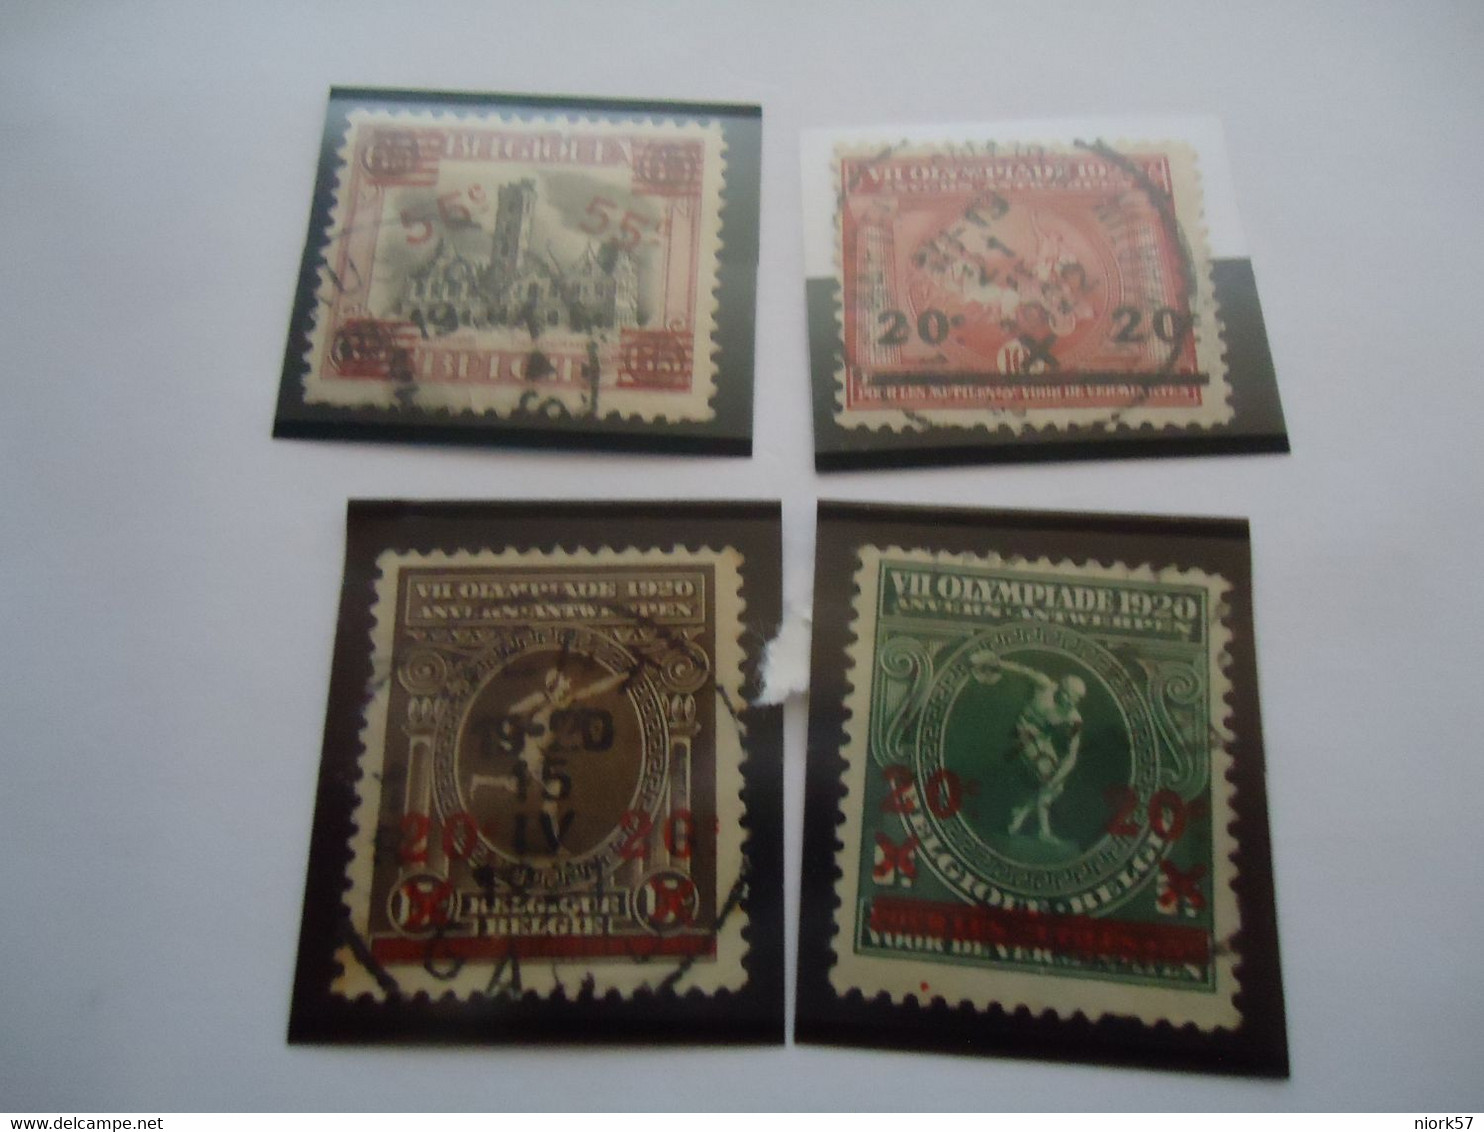 BELGIUM  4 USED STAMPS OLYMPIC GAMES 1920  OVERBRINT  WITH POSTMARKS - Verano 1920: Amberes (Anvers)